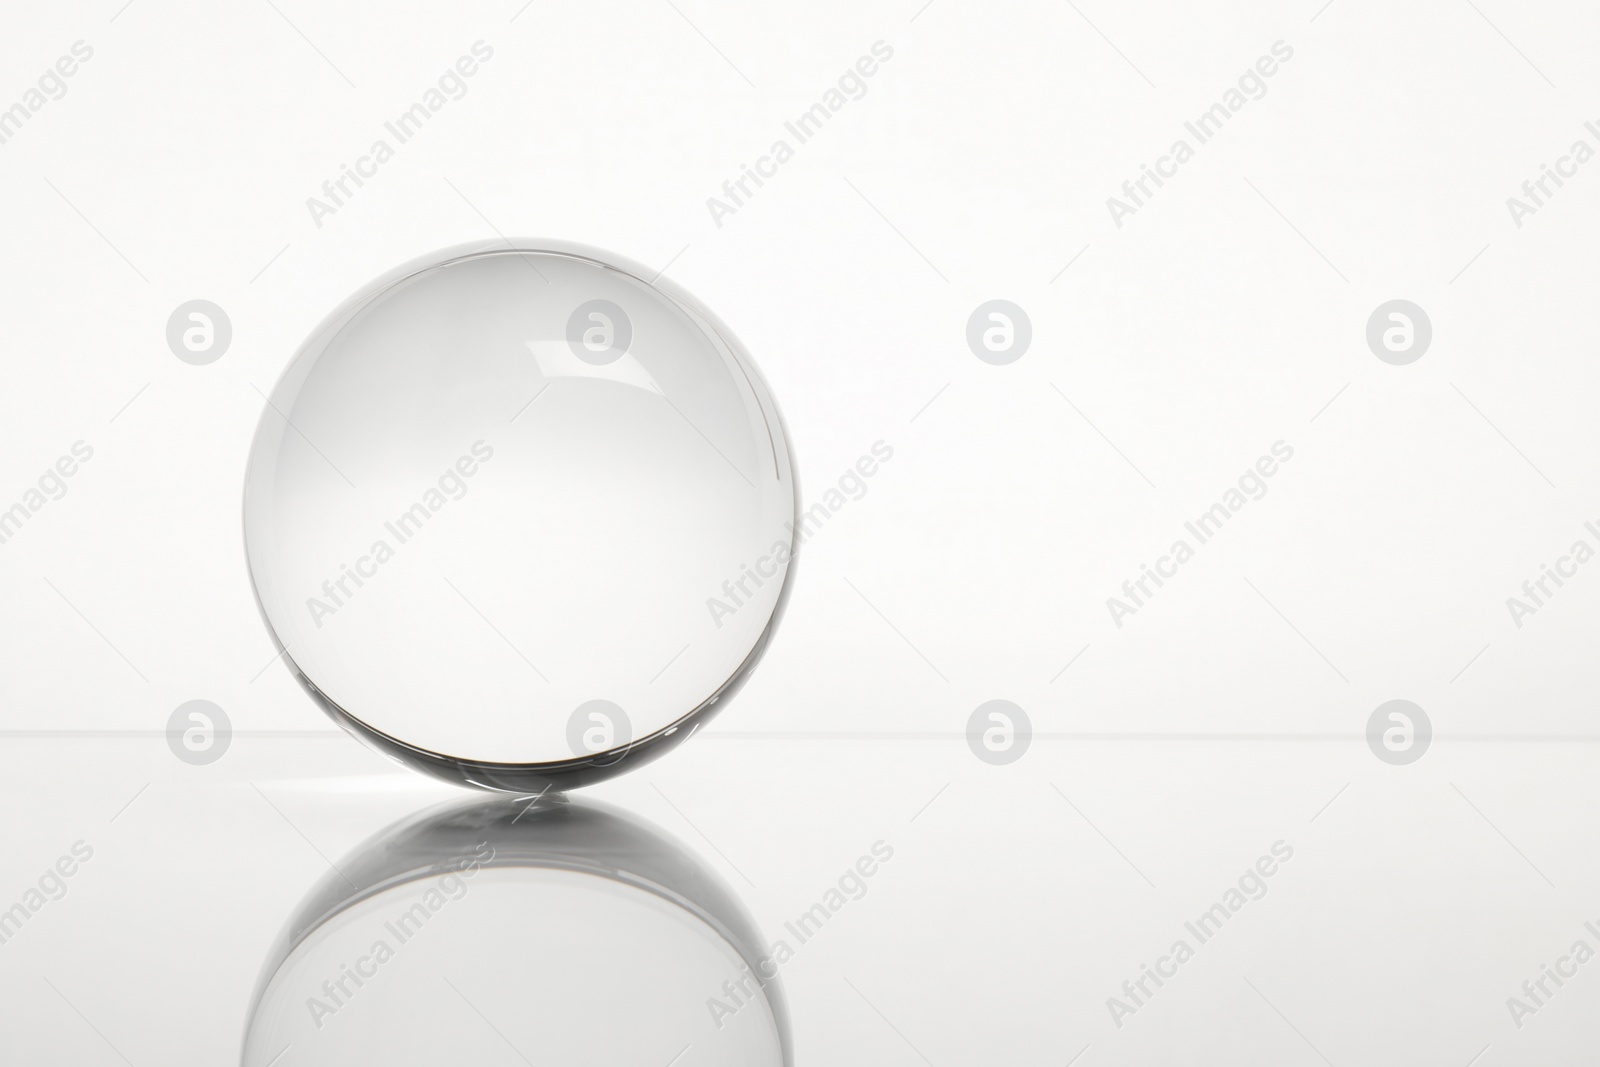 Photo of Transparent glass ball on mirror surface against white background. Space for text